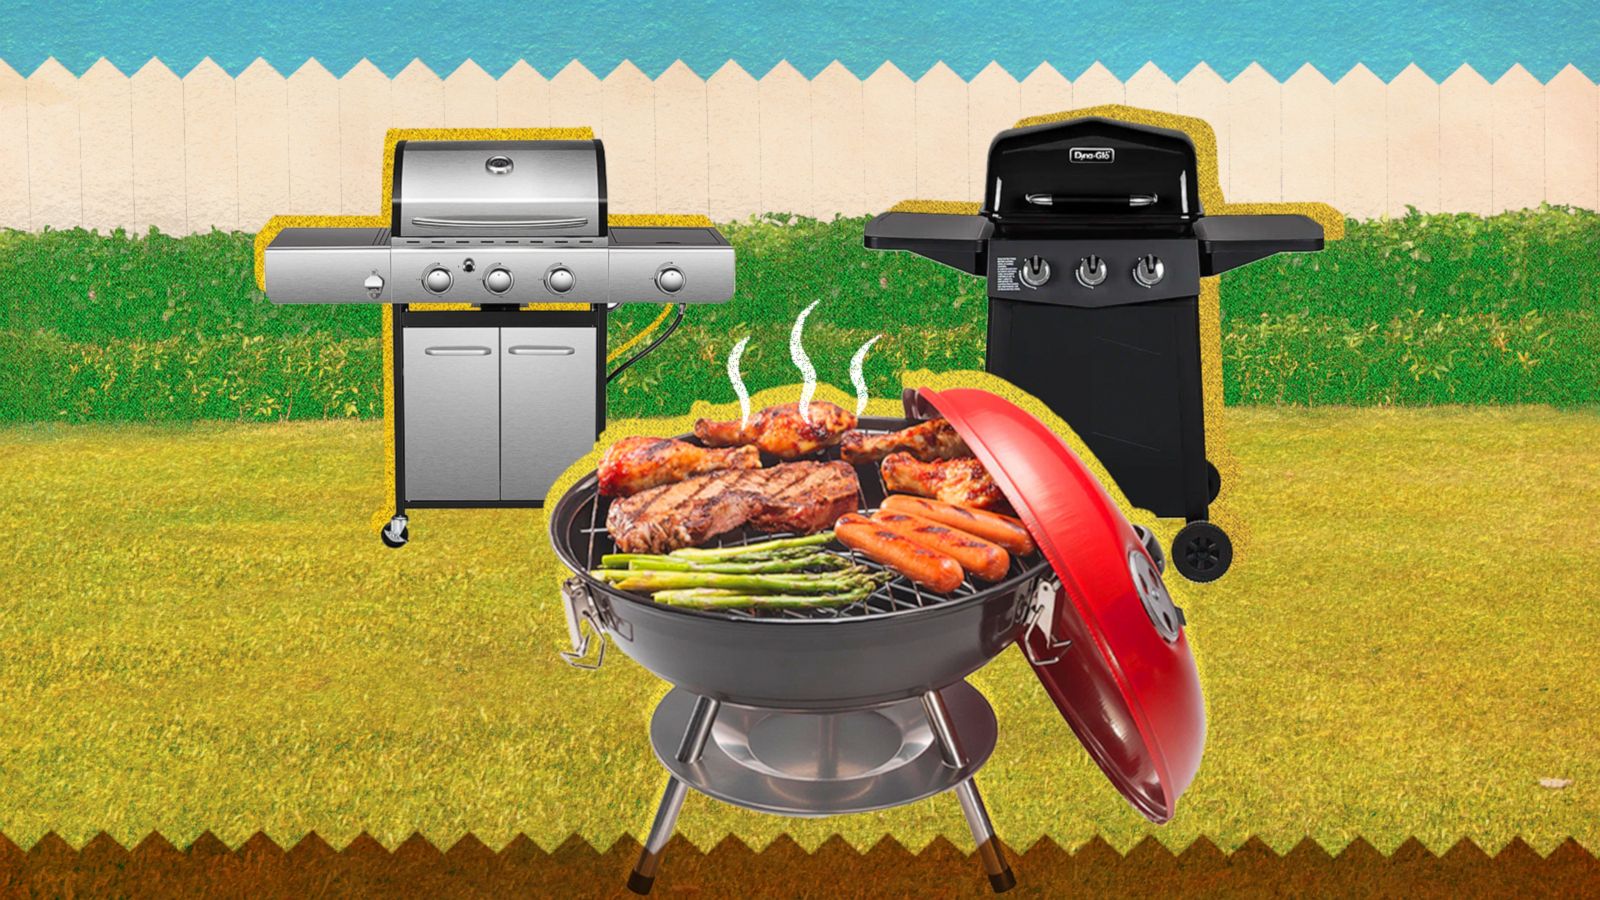 Products Double Barbeque Grill - Gas Grill ＆ Charcoal Grill Portable BBQ  Propane Grill,Camping Grill Outdoor Cooking,for Outdoor Garden Picnics